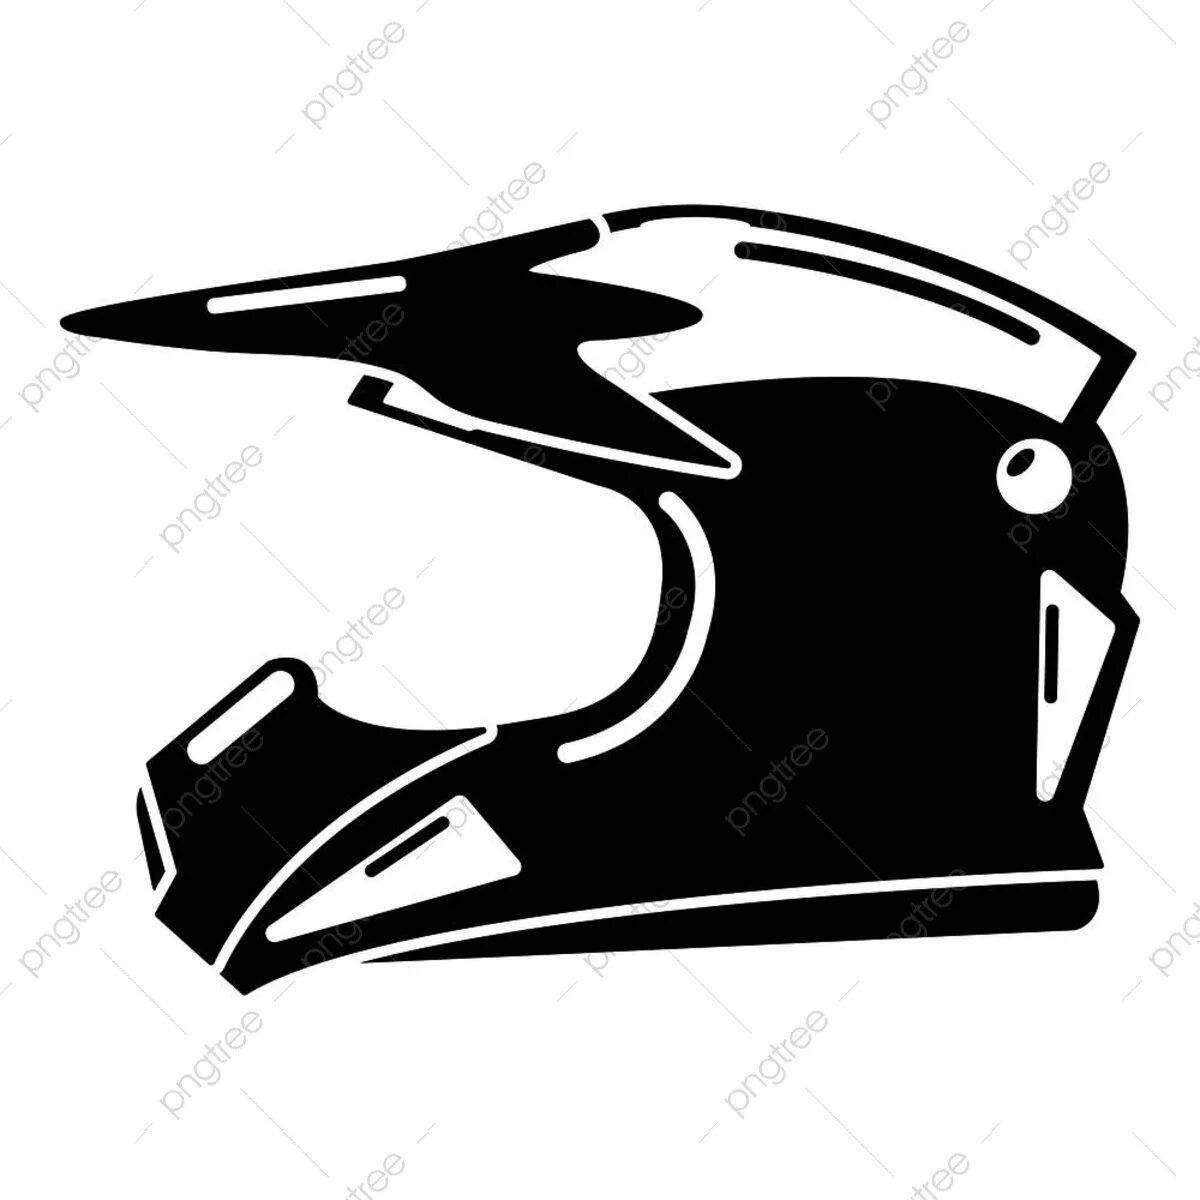 Adorable motorcycle helmet coloring page